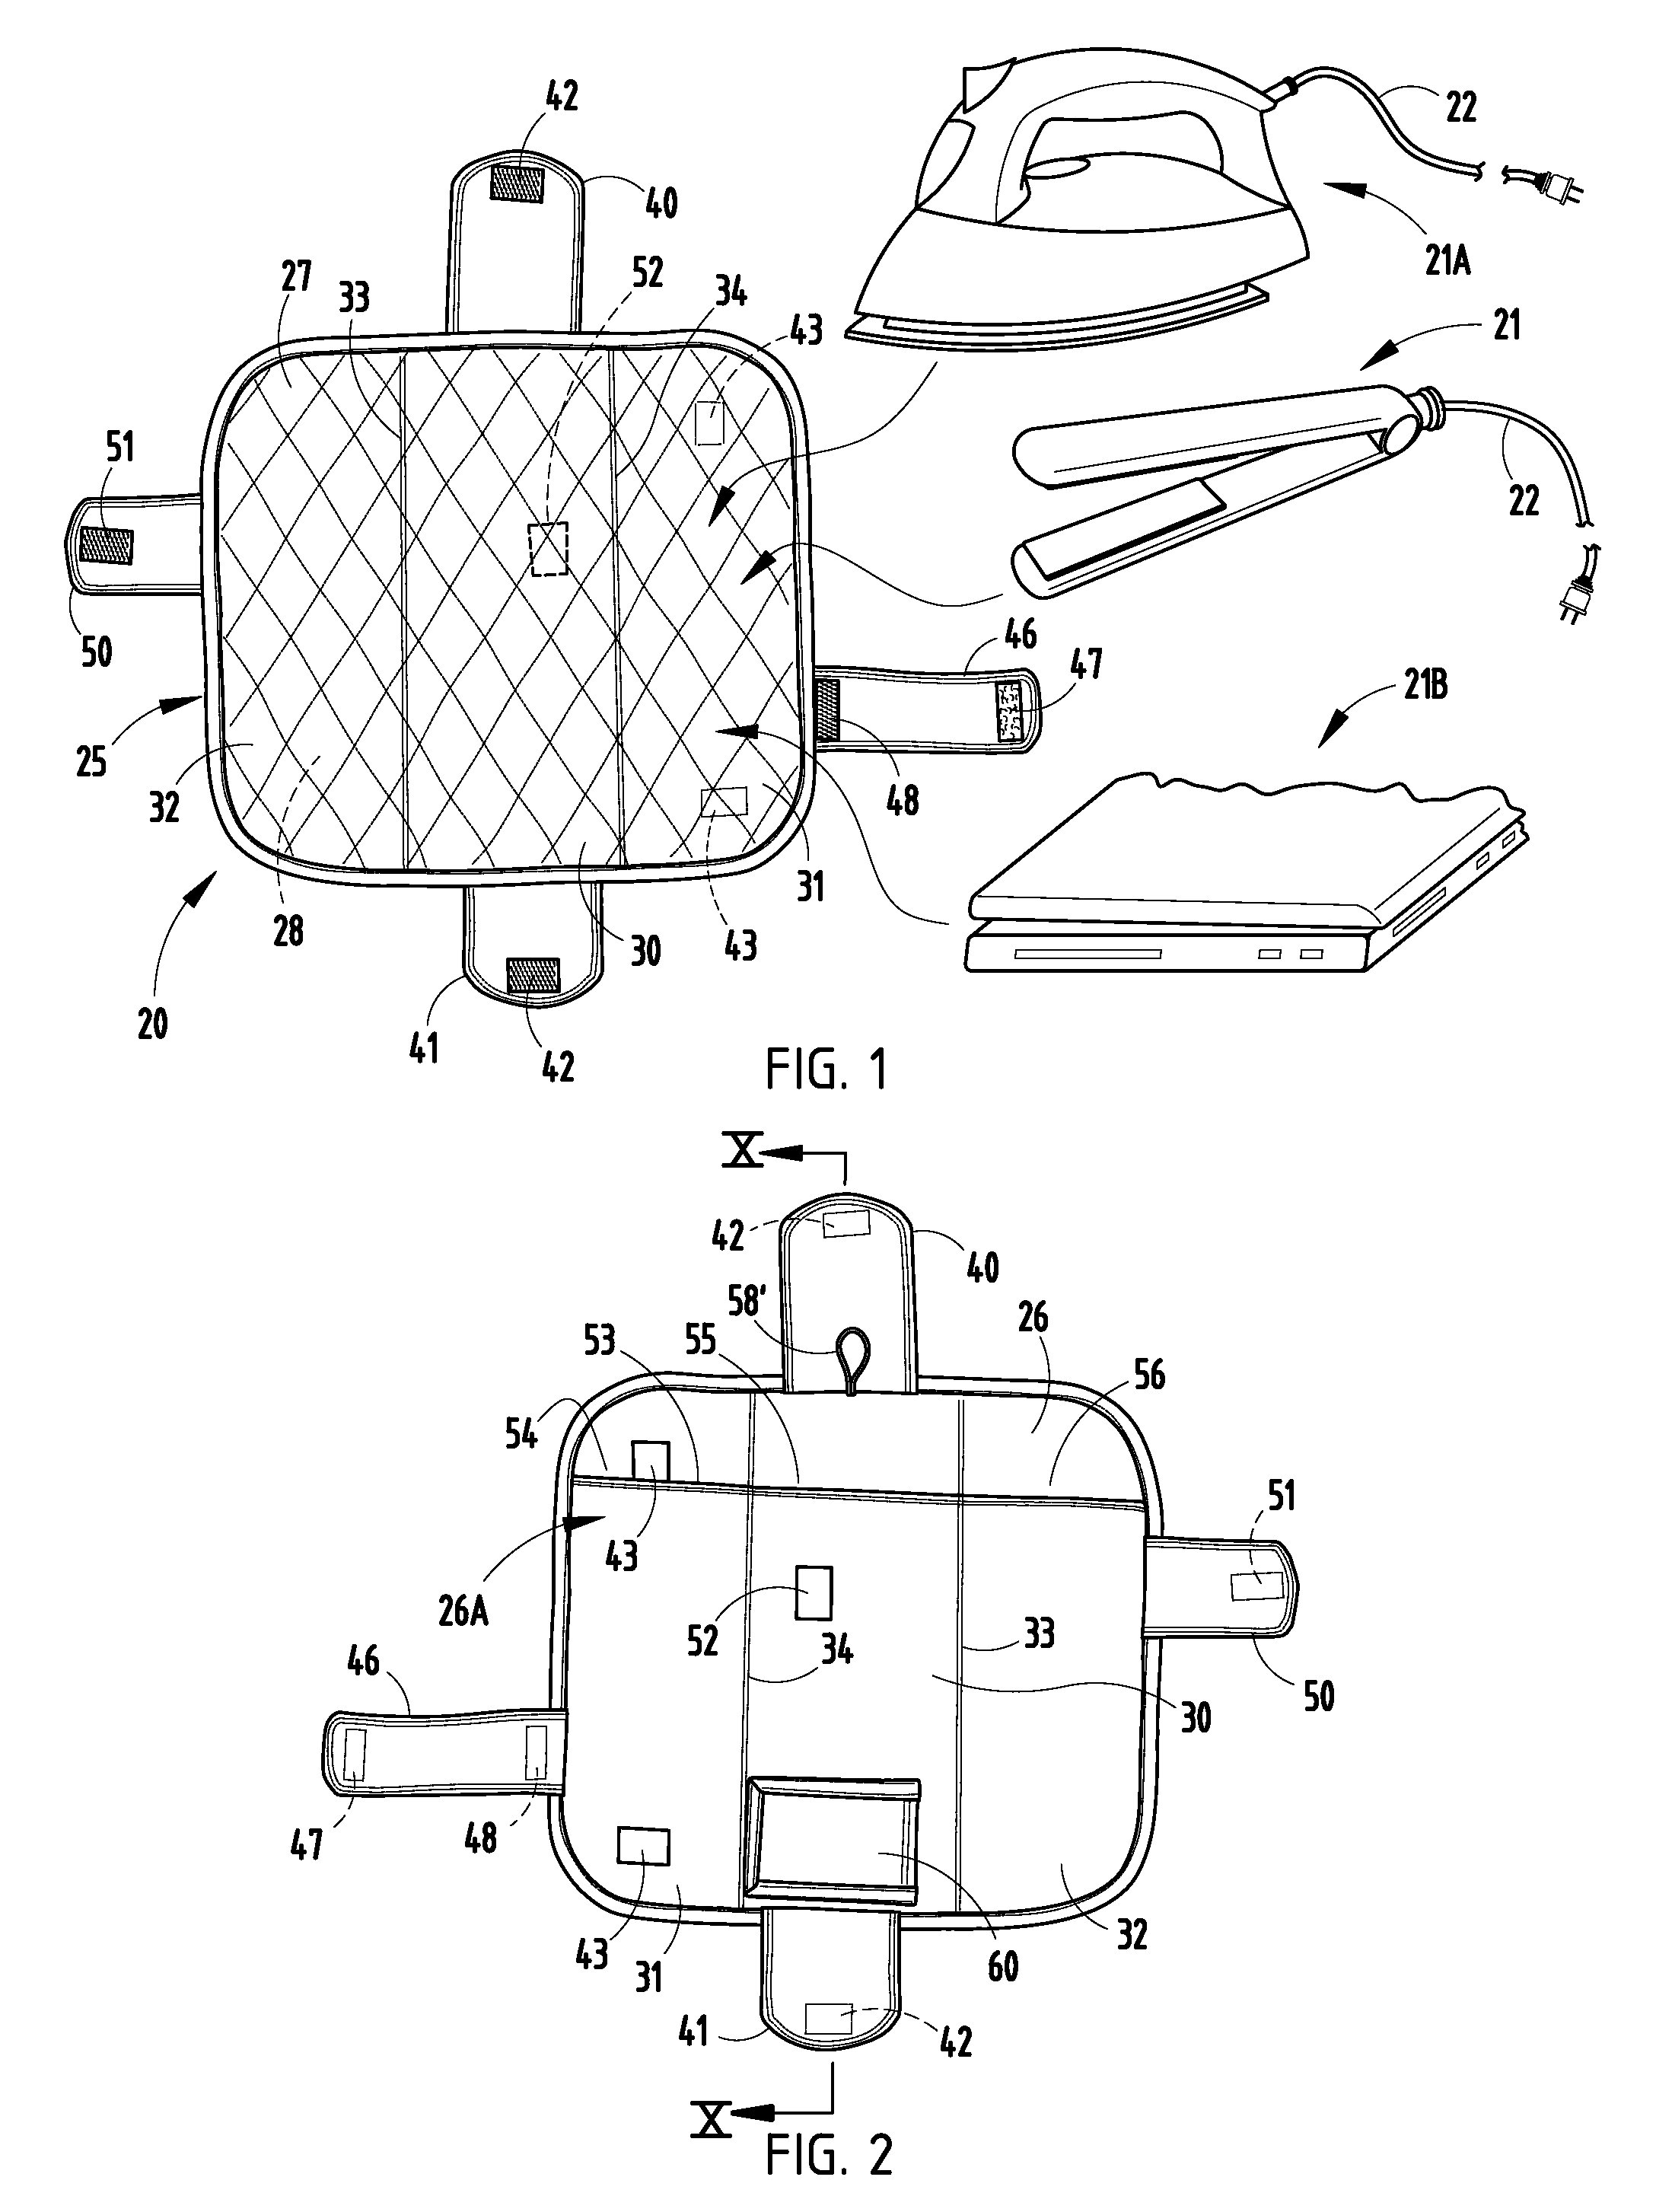 Multi-function holder and carrier for hot appliances